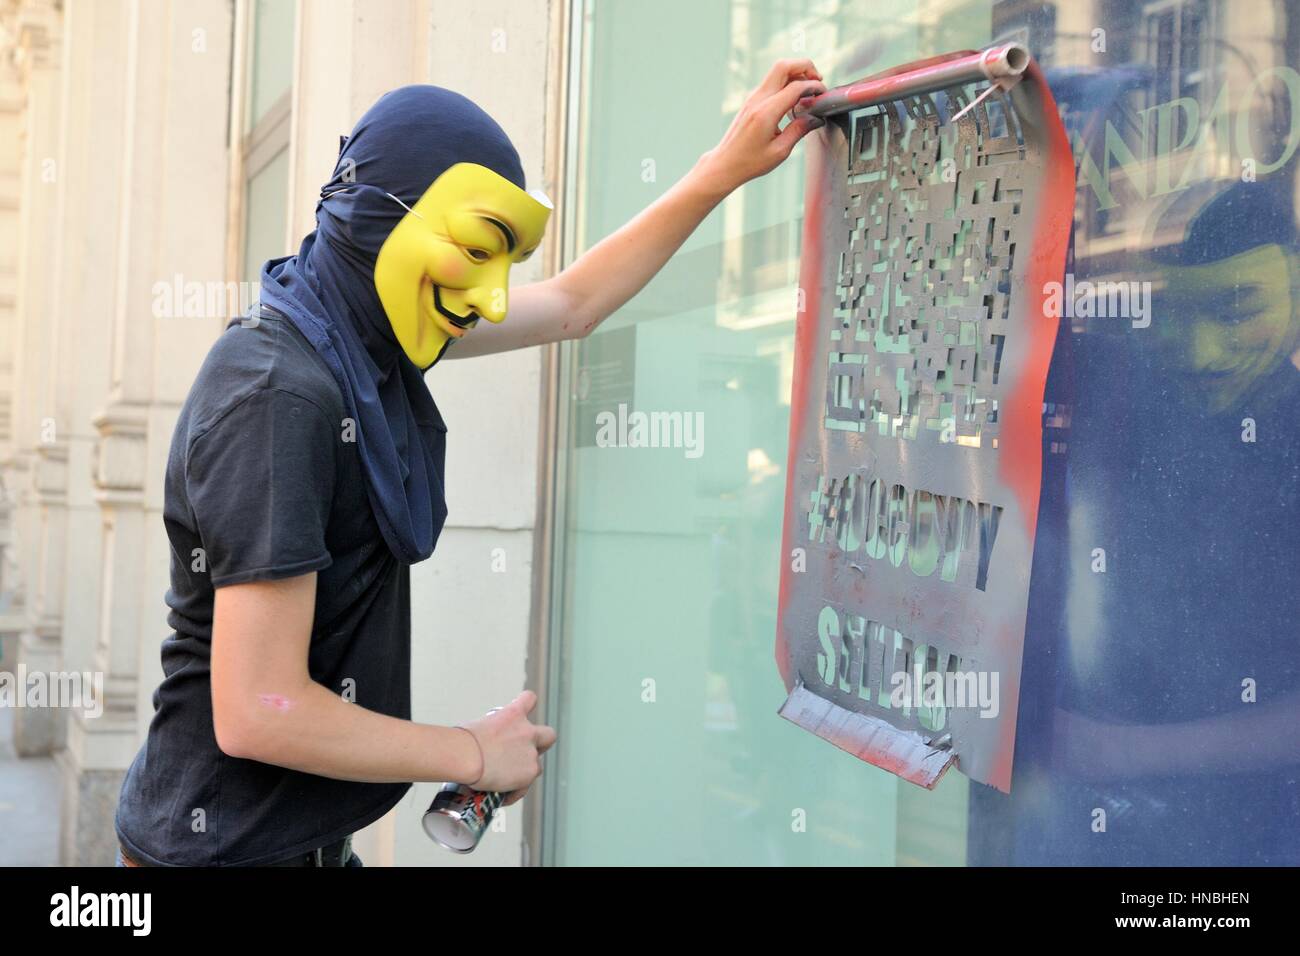 anonymous protester at against austerity demostration Stock Photo